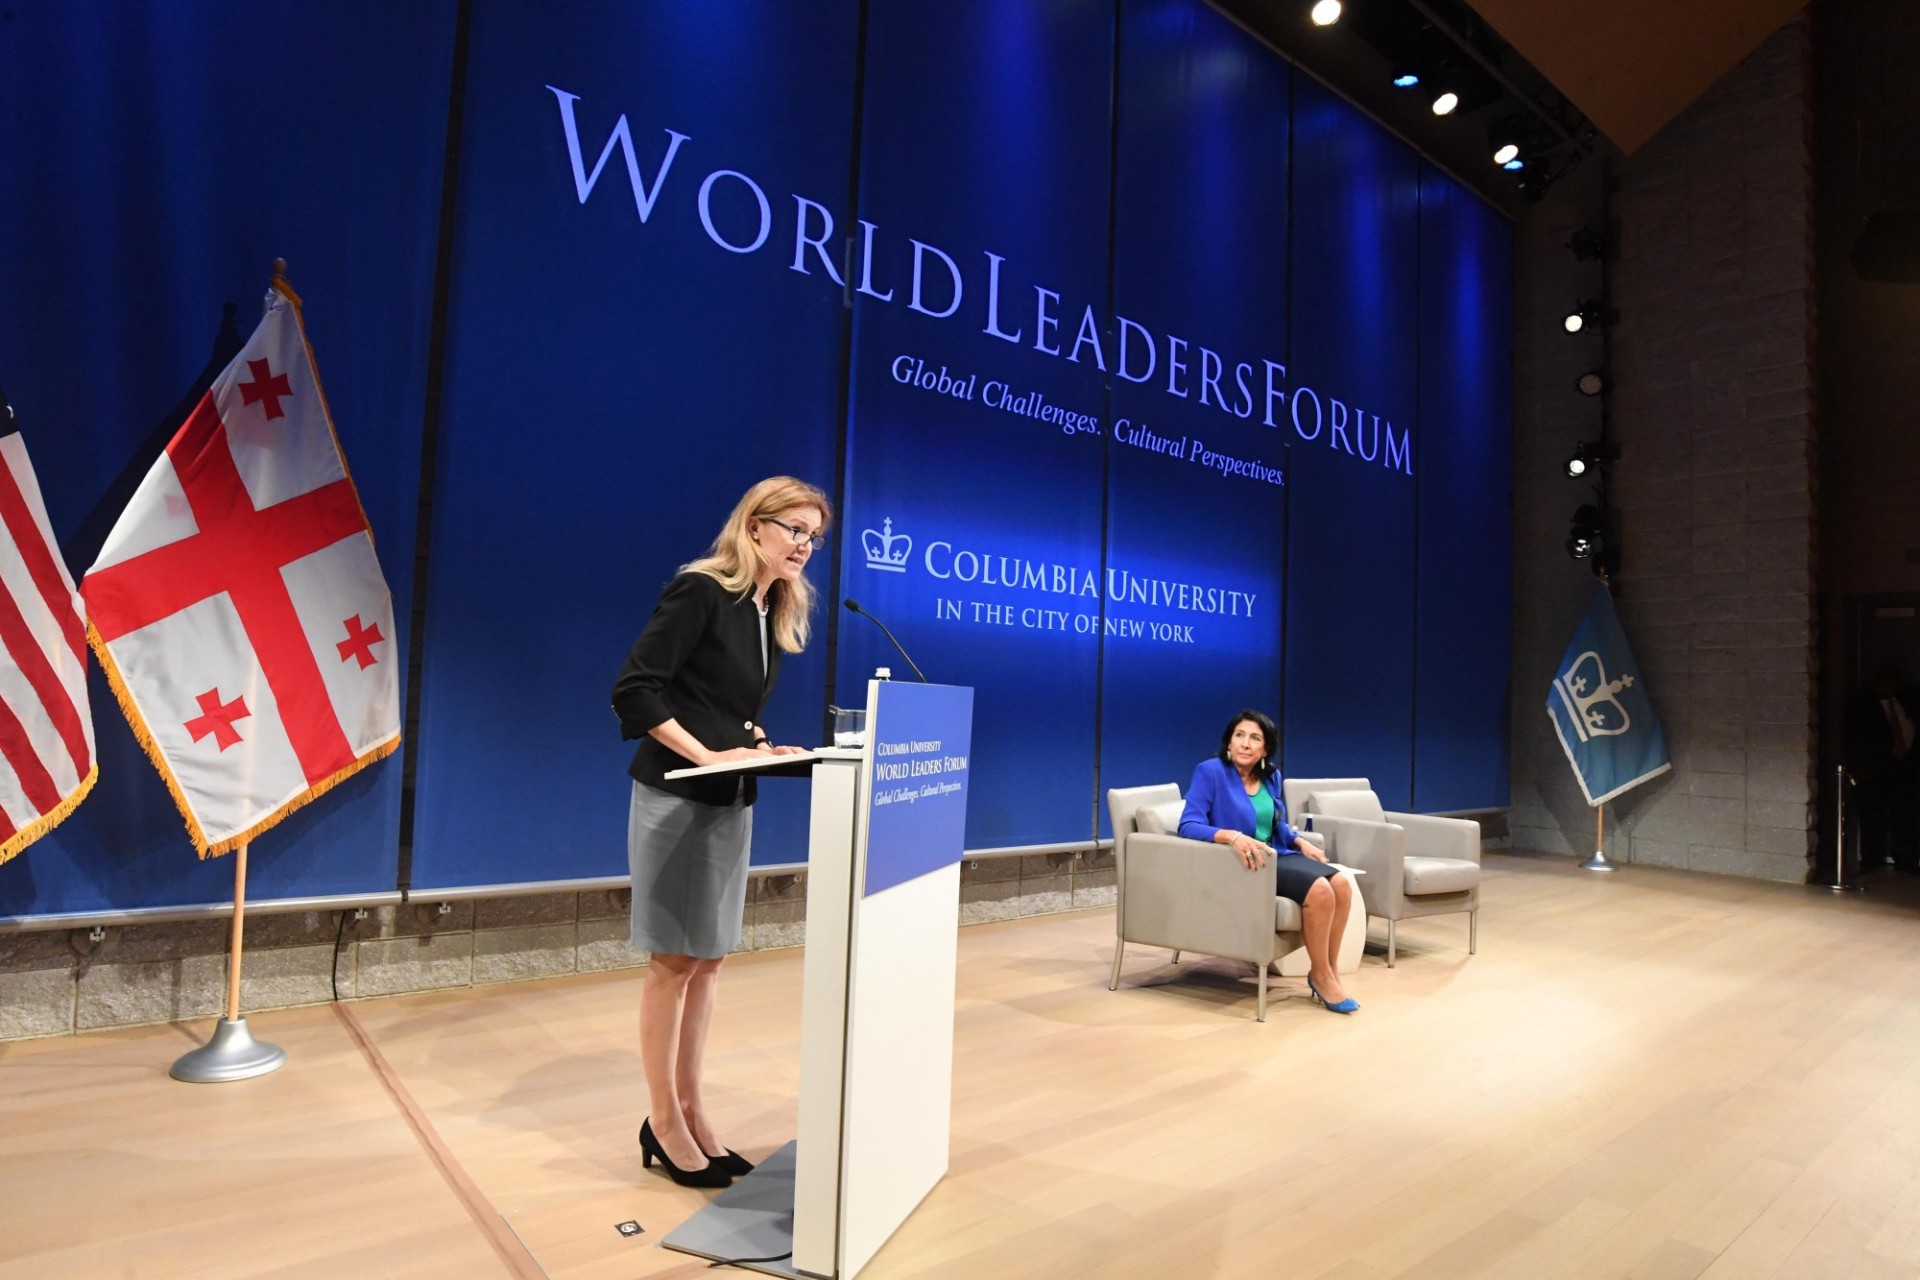 Maya Tolstoy, Interim Executive Vice President for Arts and Sciences and Dean of the Faculty of Arts and Sciences begins the World Leaders Forum with an introduction of President Salome Zourabichvili of Georgia.